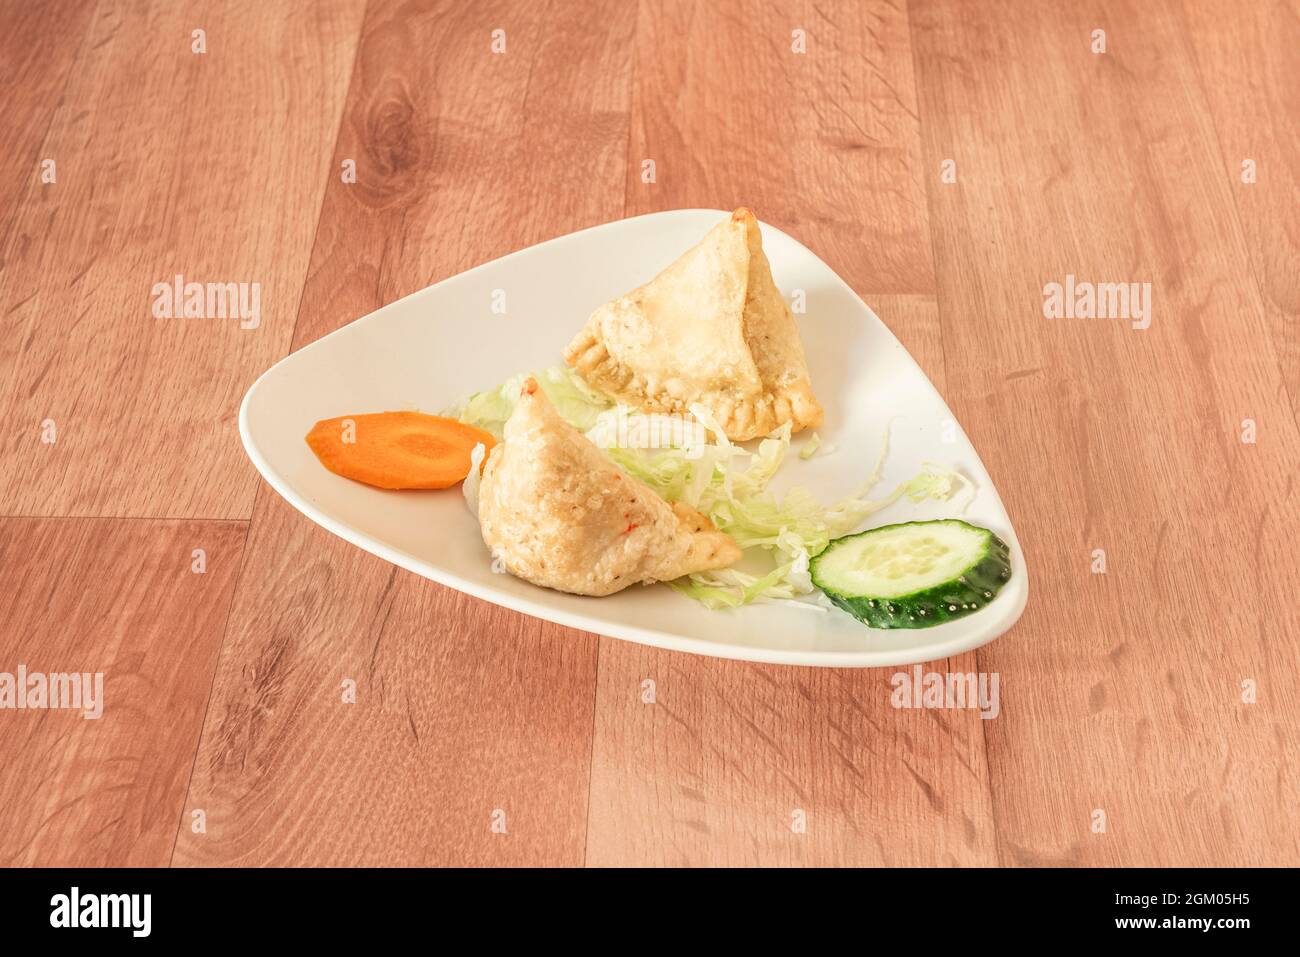 Vegetable samosas cooked in Pakistani kebab restaurant with white plate in Ramadan and wooden table Stock Photo